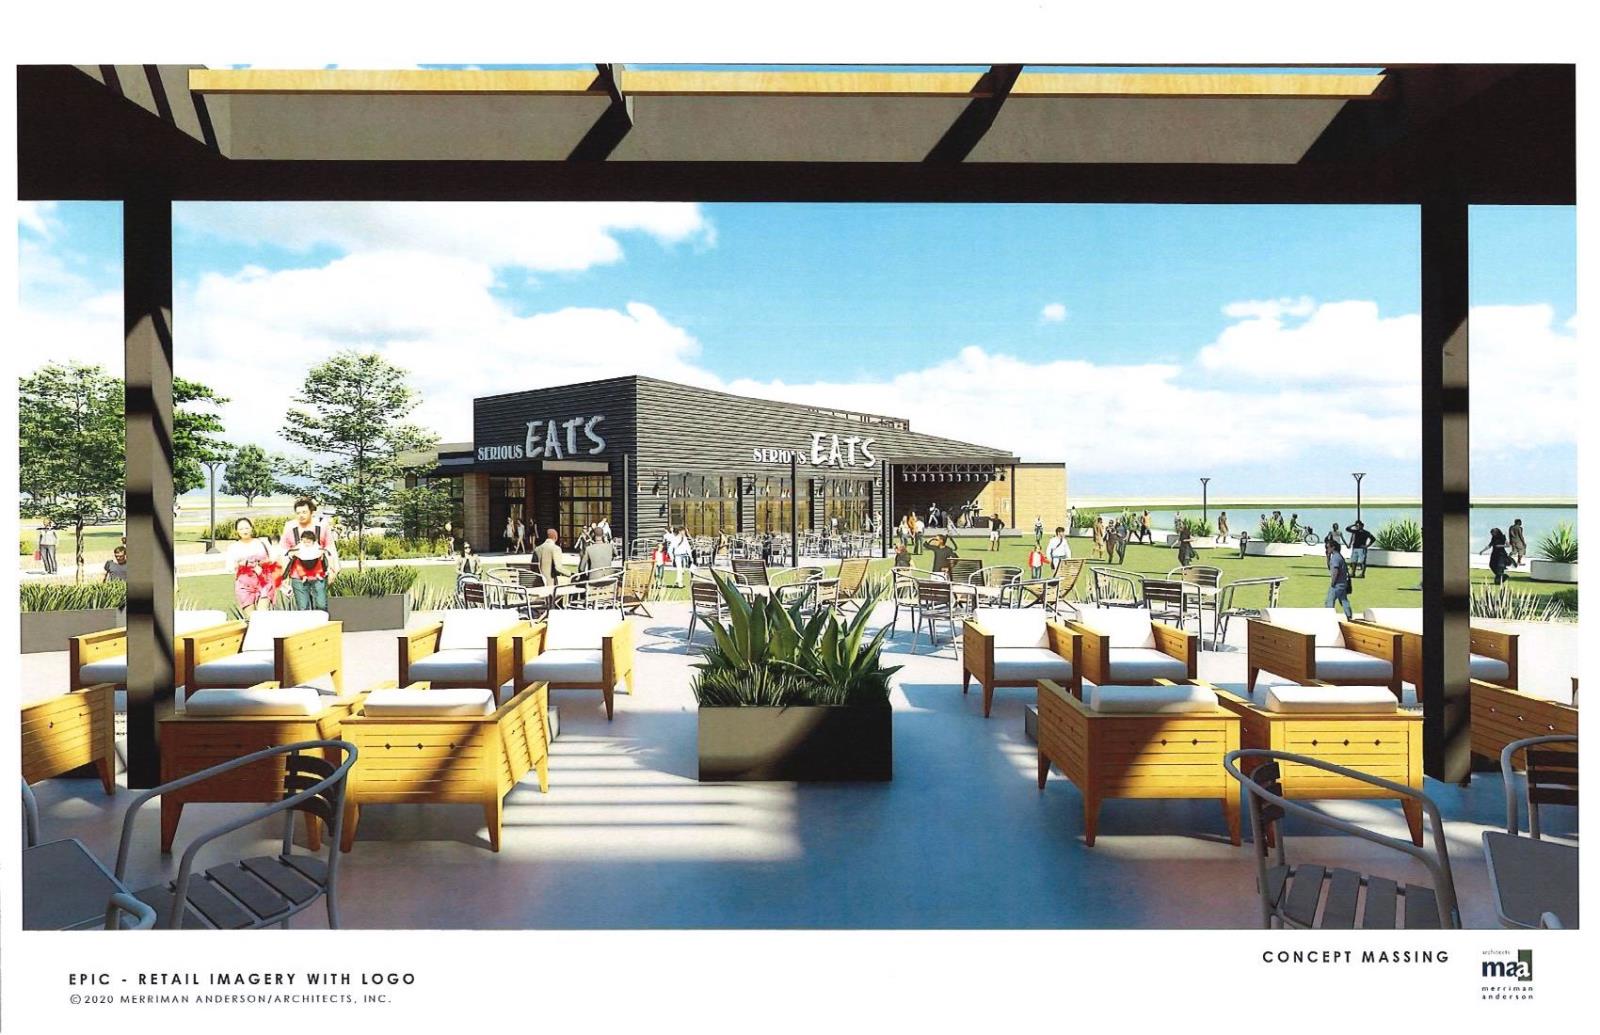 Concept design of exterior of Sprouts Eats with seating outside